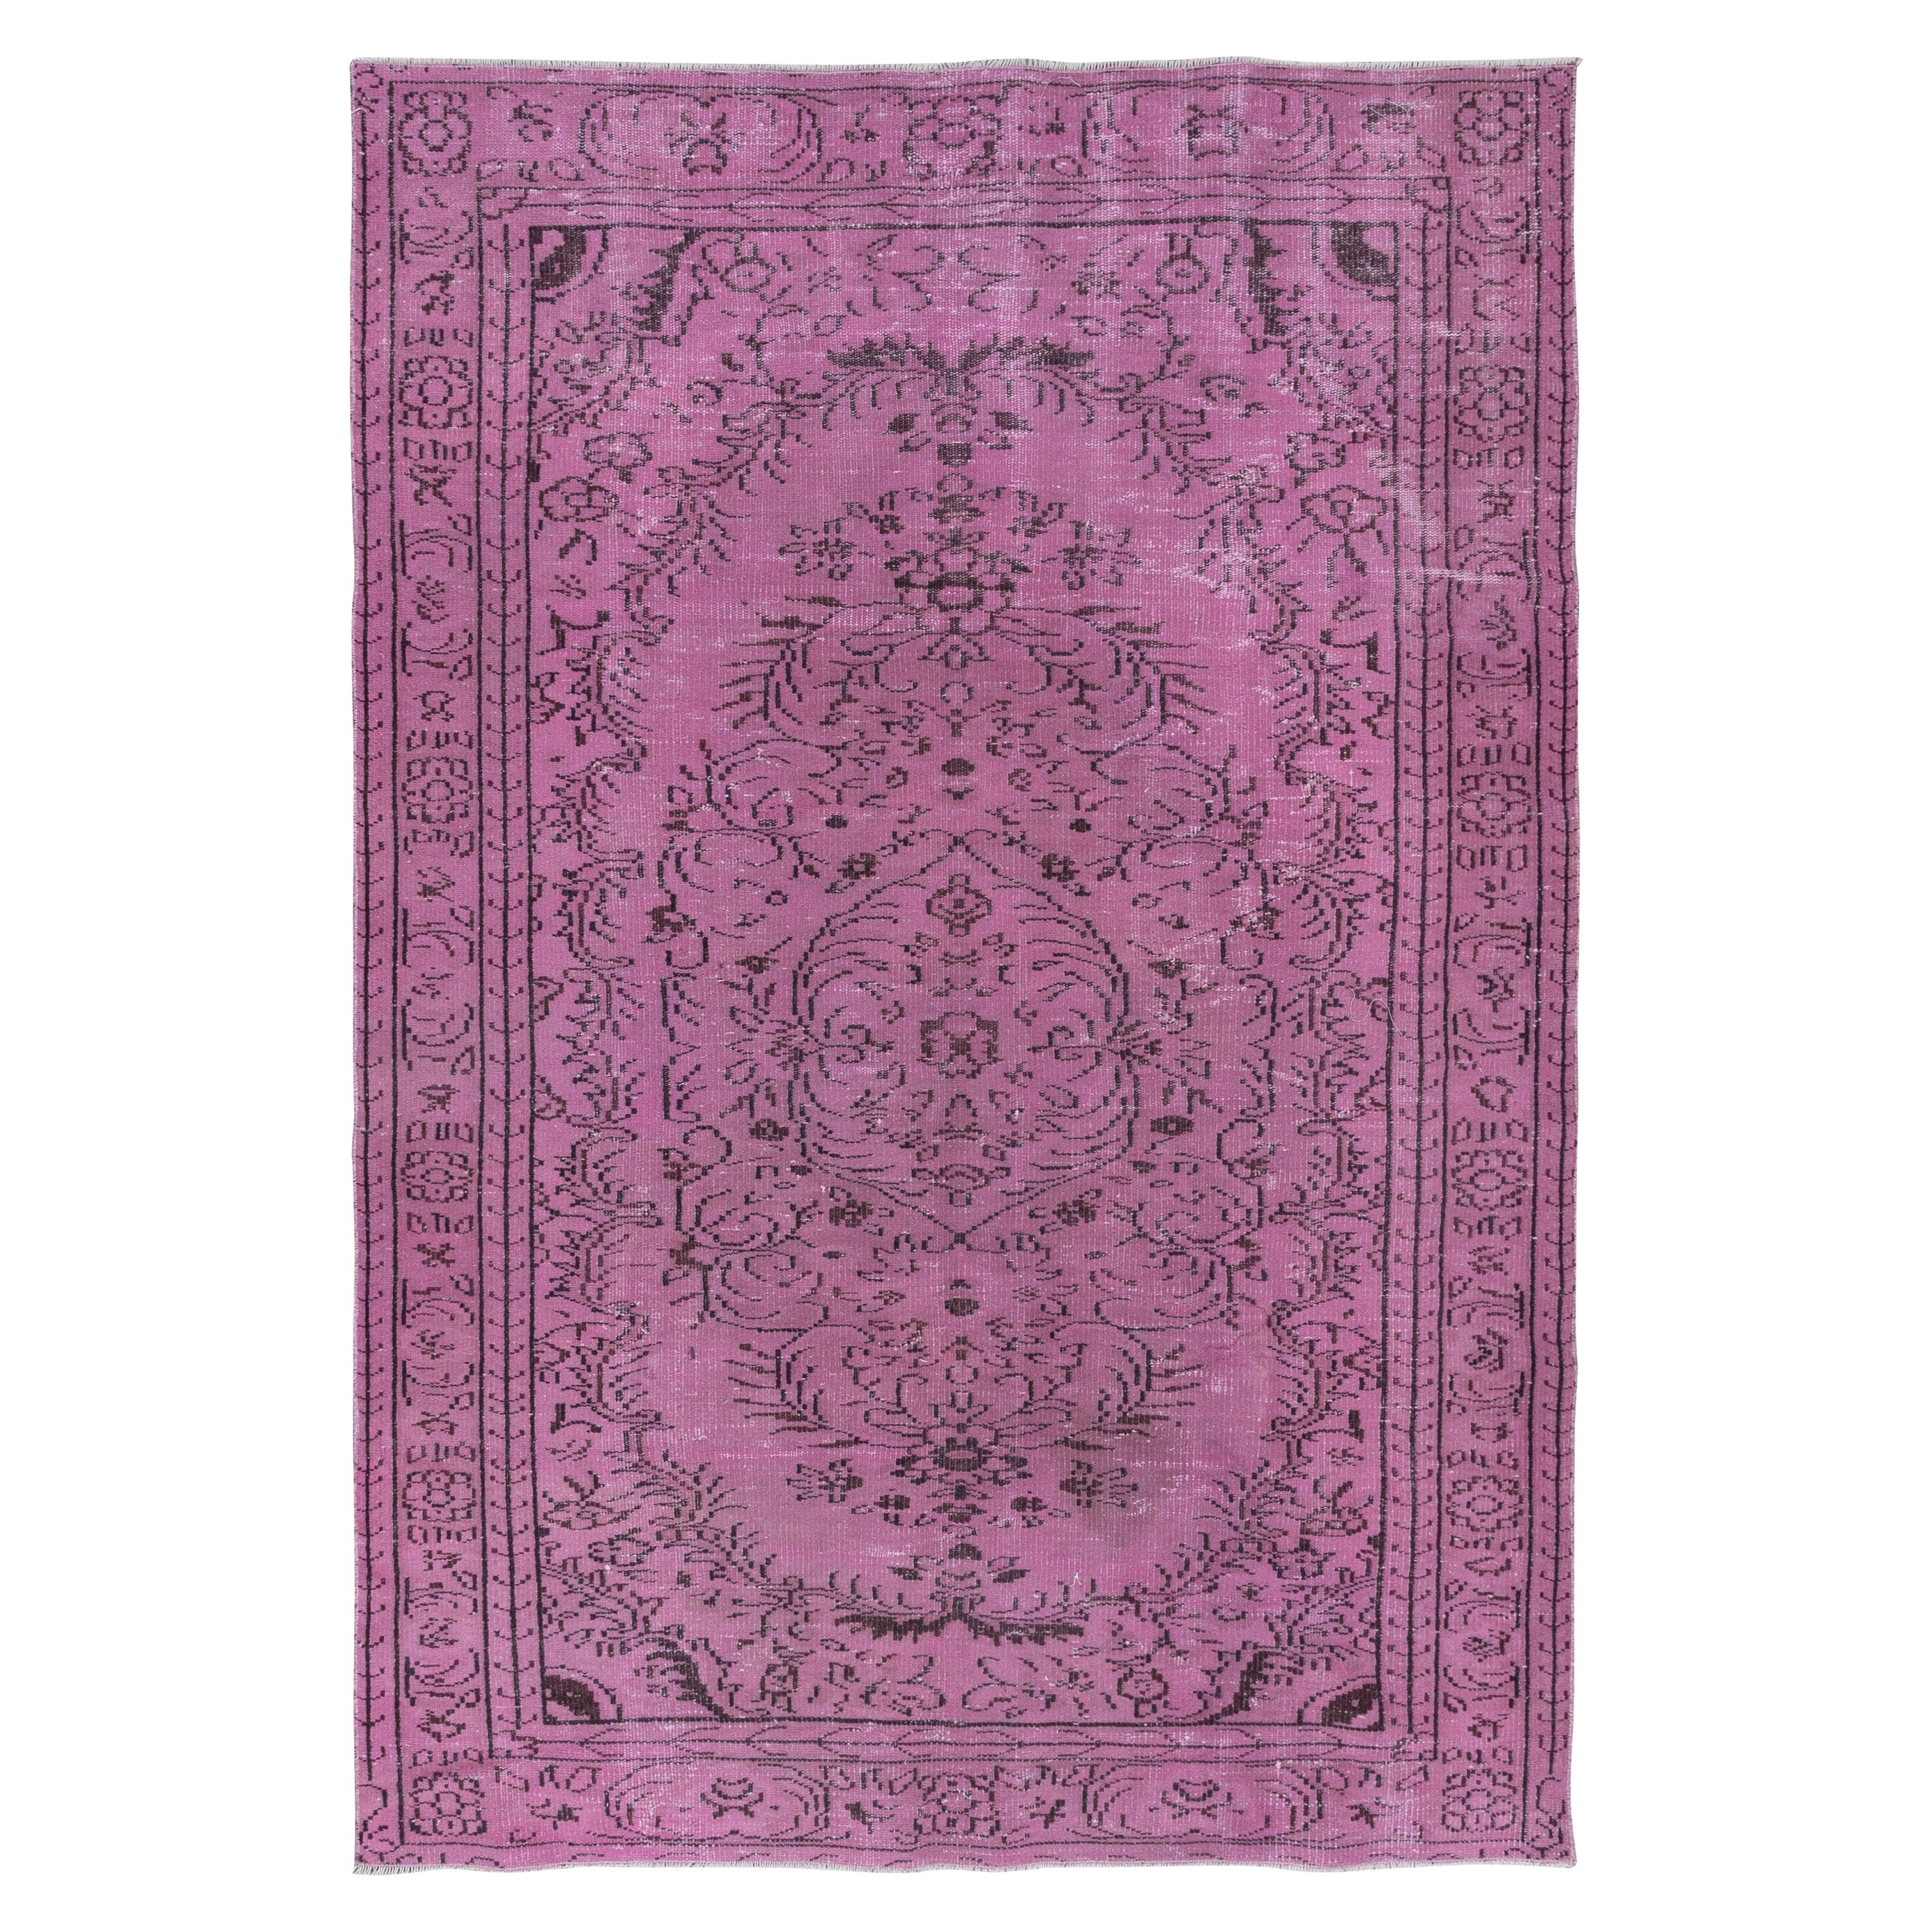 5.8x8.6 Ft Contemporary Turkish Pink Rug, Handmade Wool Living Room Carpet For Sale